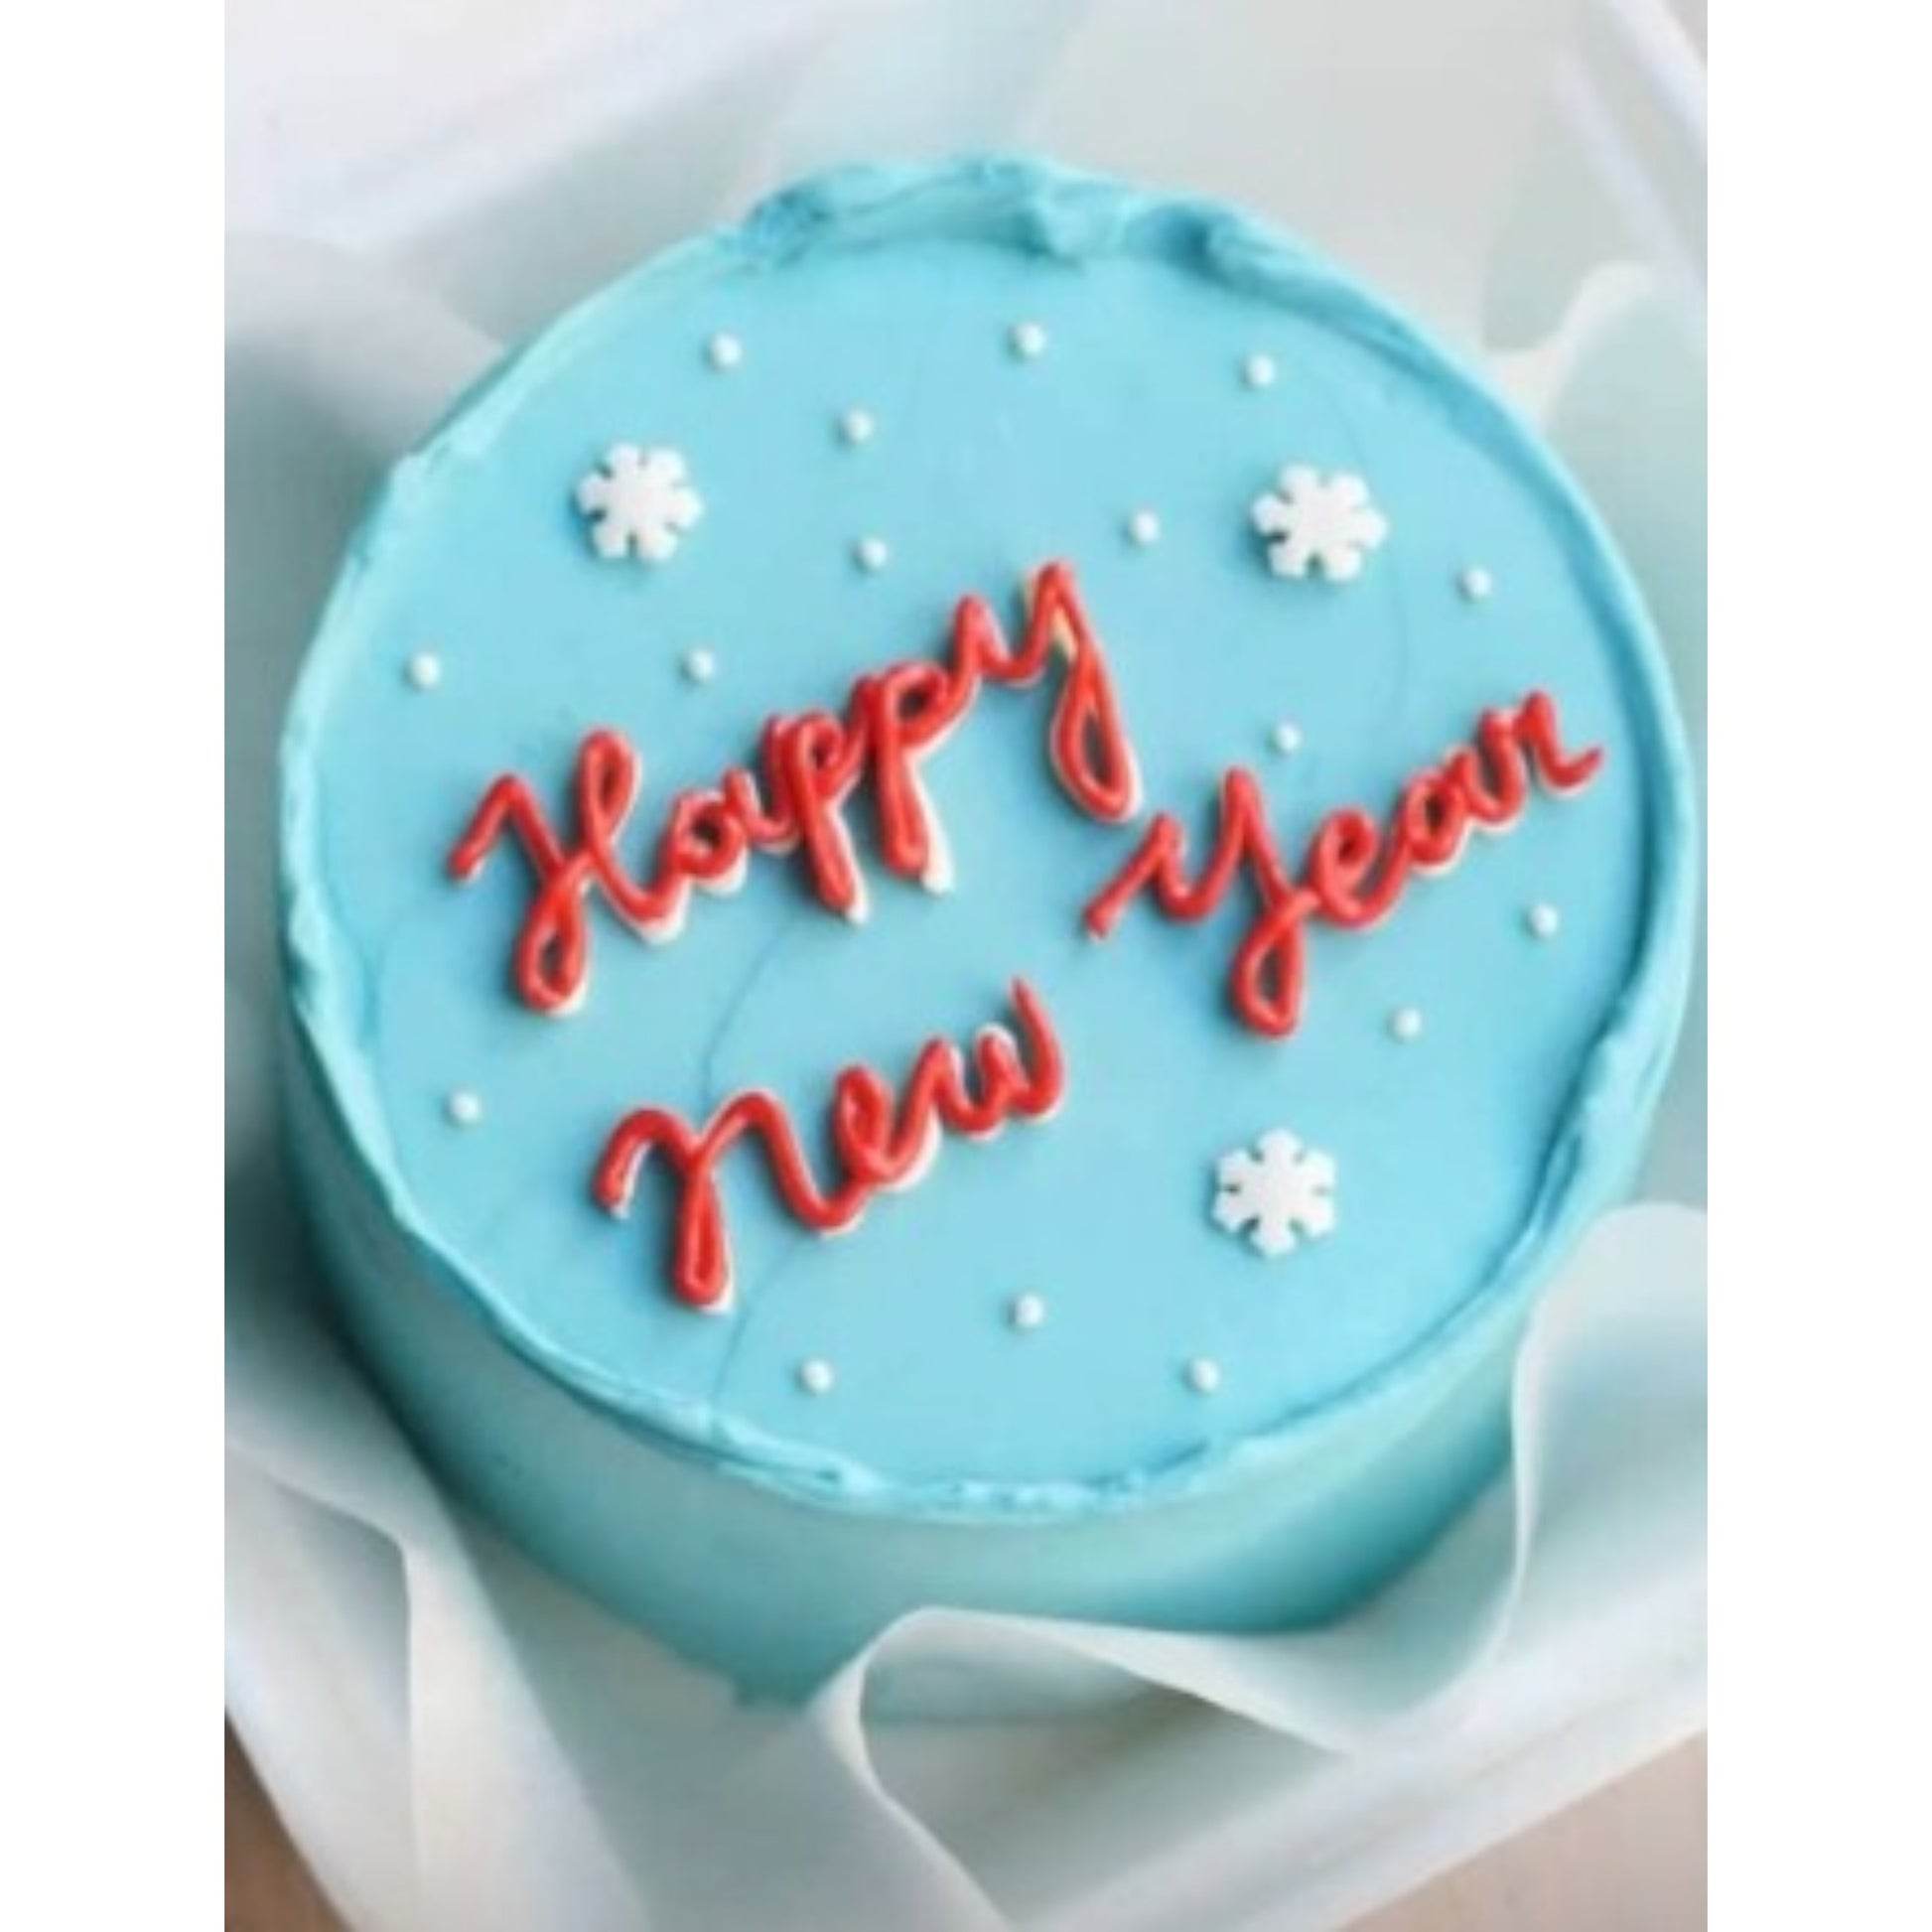 Buy or Send New Year Special Cake By Bakers Wagon